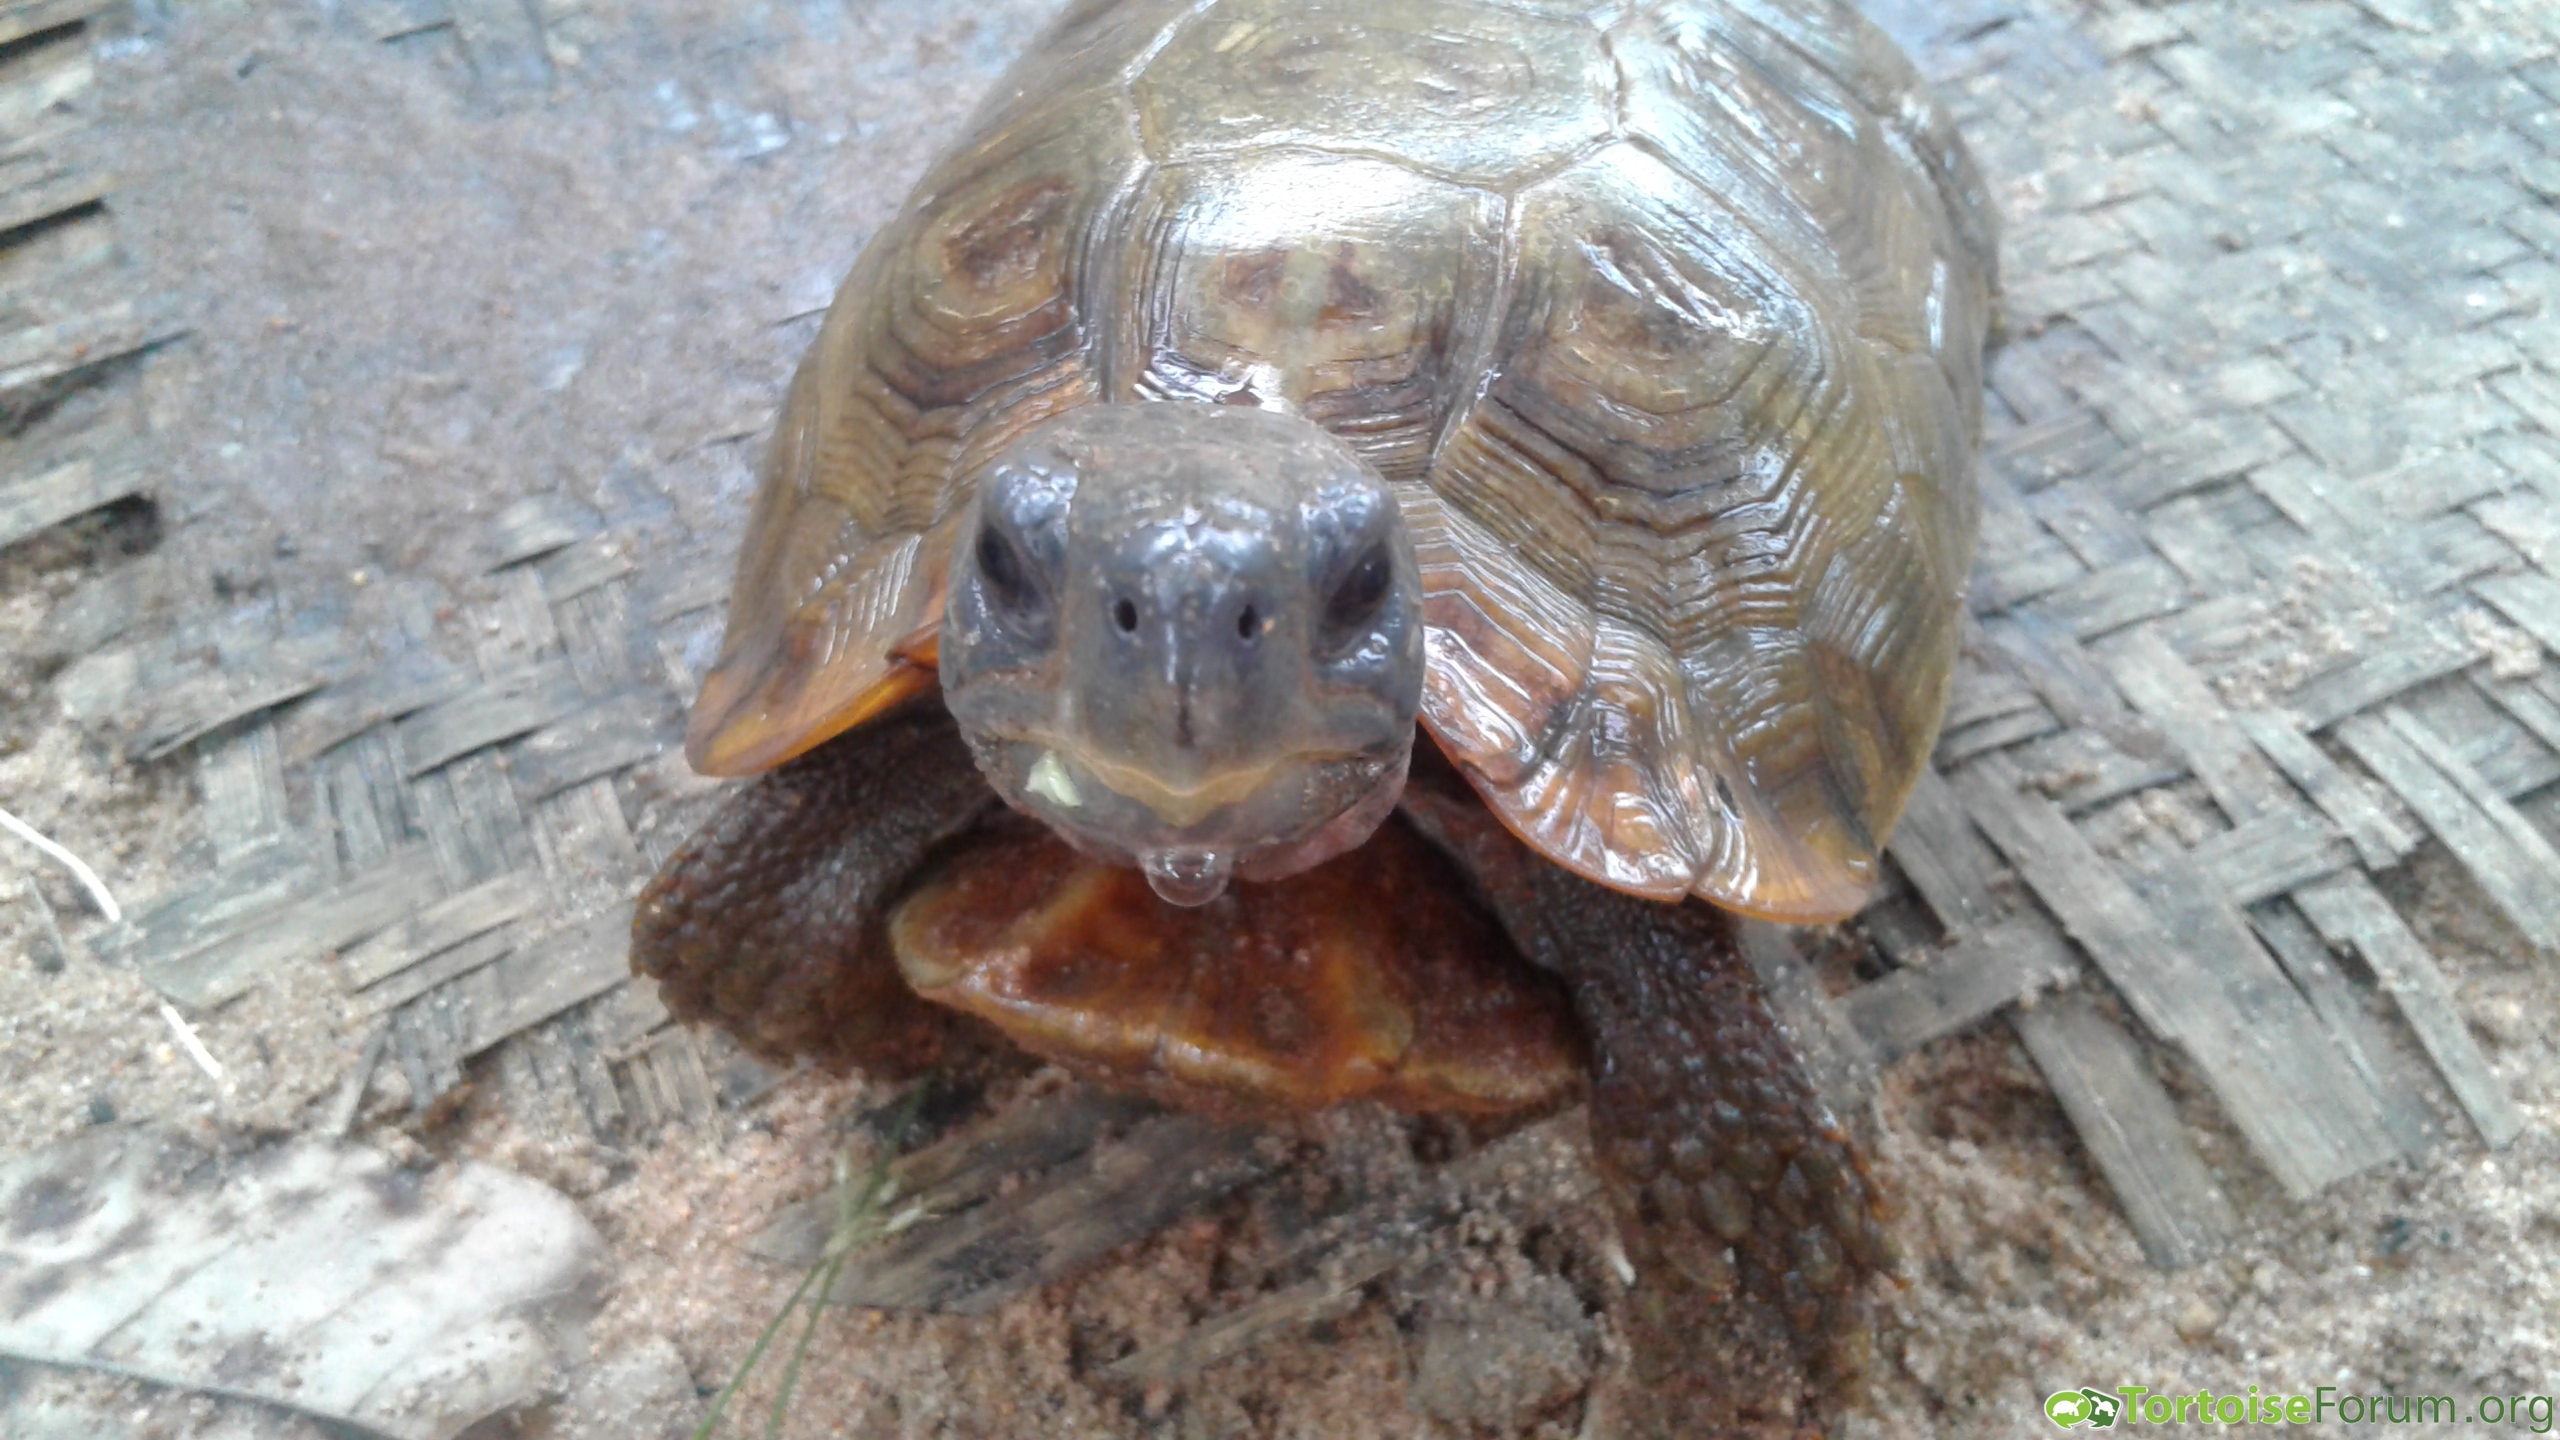 Moses the Tortoise